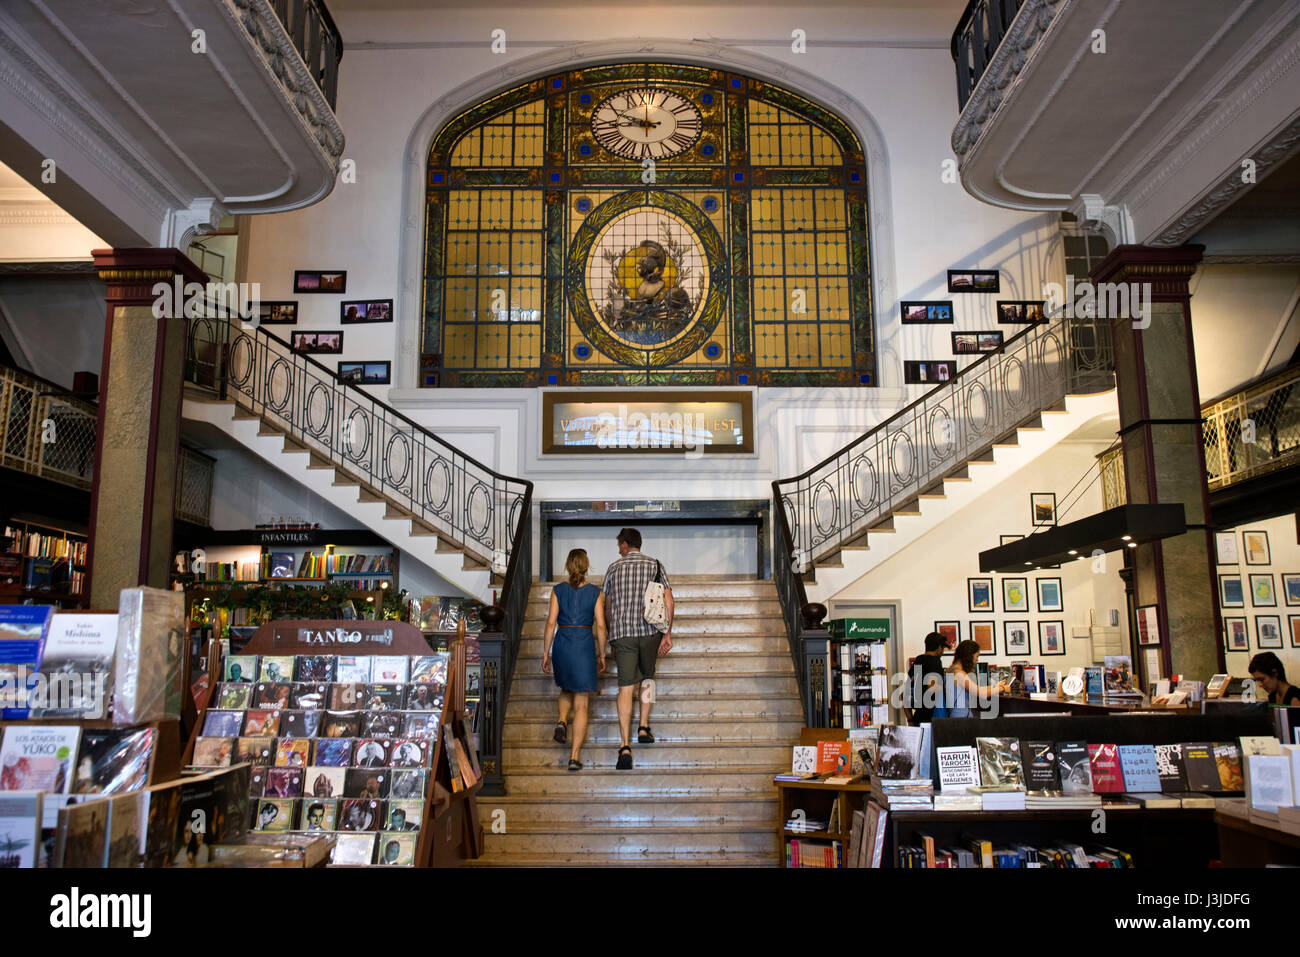 Puro Verso library in the old town of Montevideo, Uruguay. Stock Photo